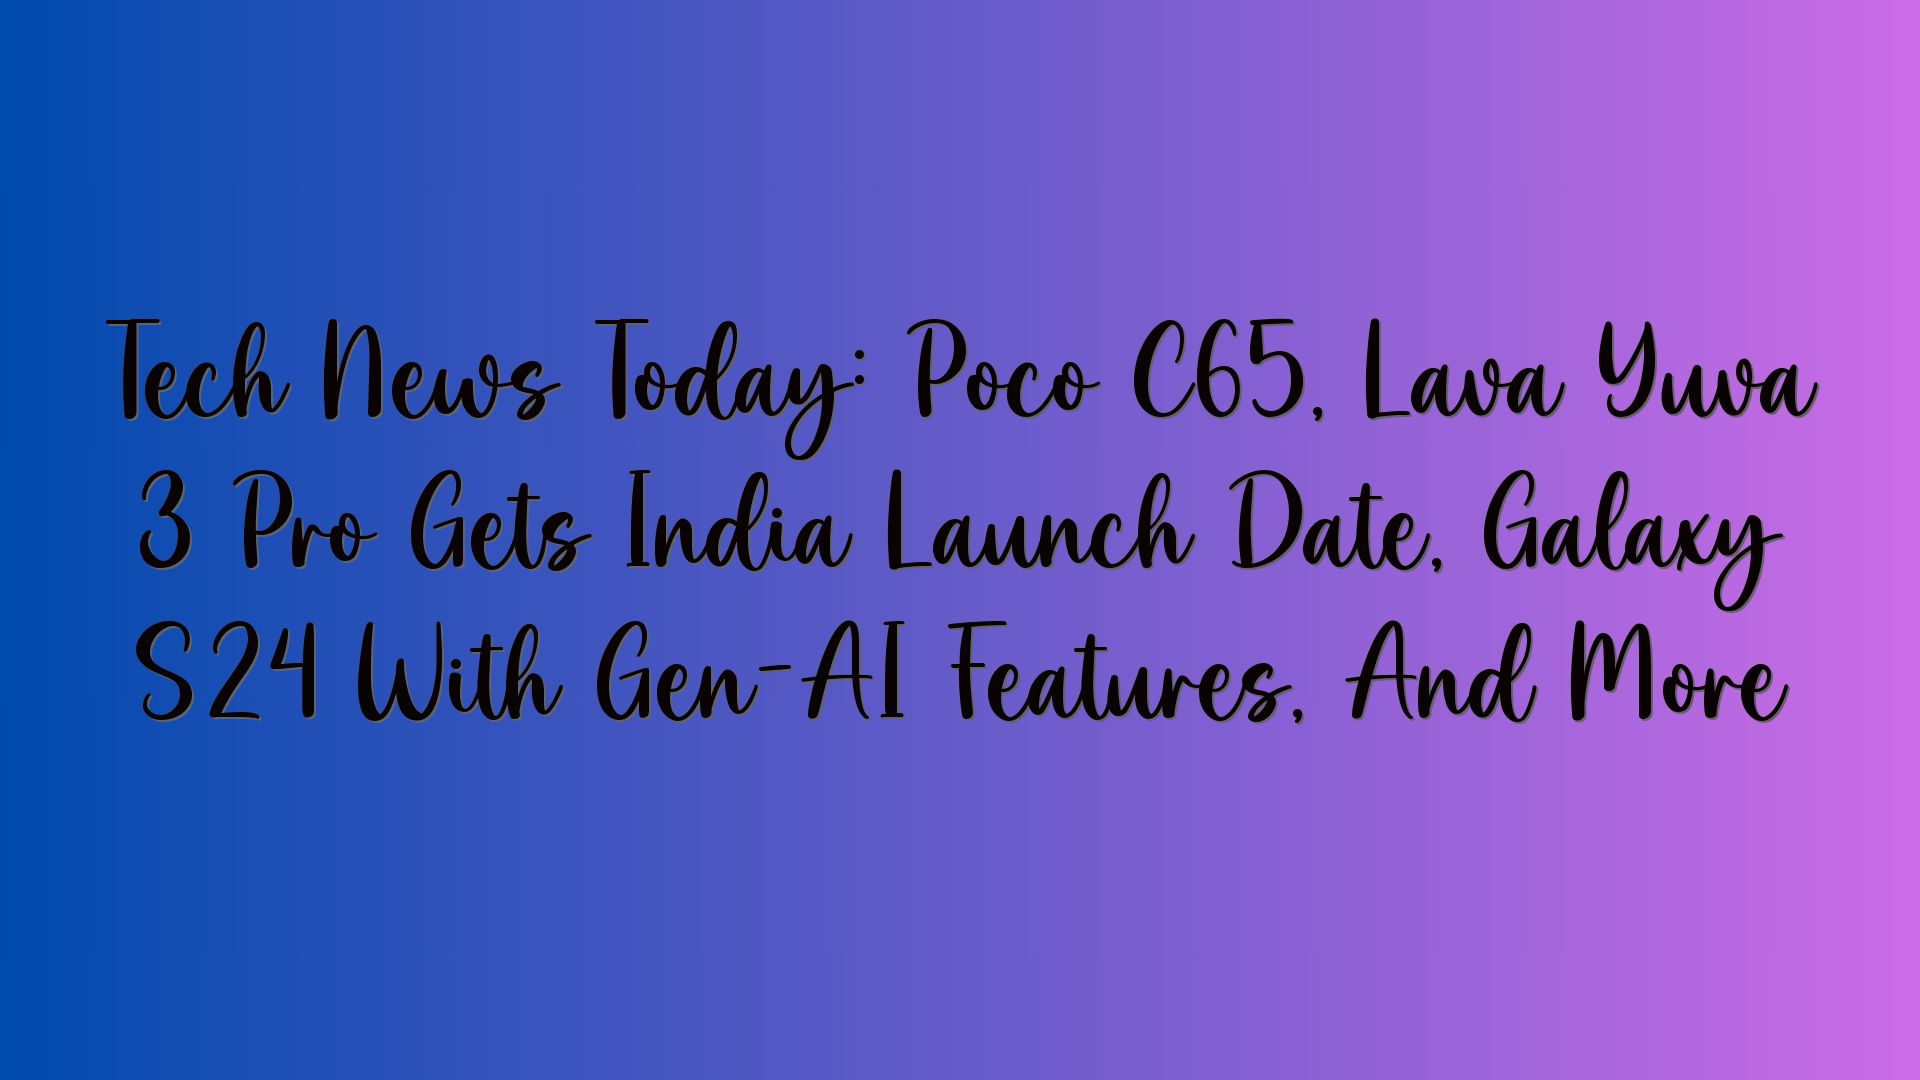 Tech News Today: Poco C65, Lava Yuva 3 Pro Gets India Launch Date, Galaxy S24 With Gen-AI Features, And More